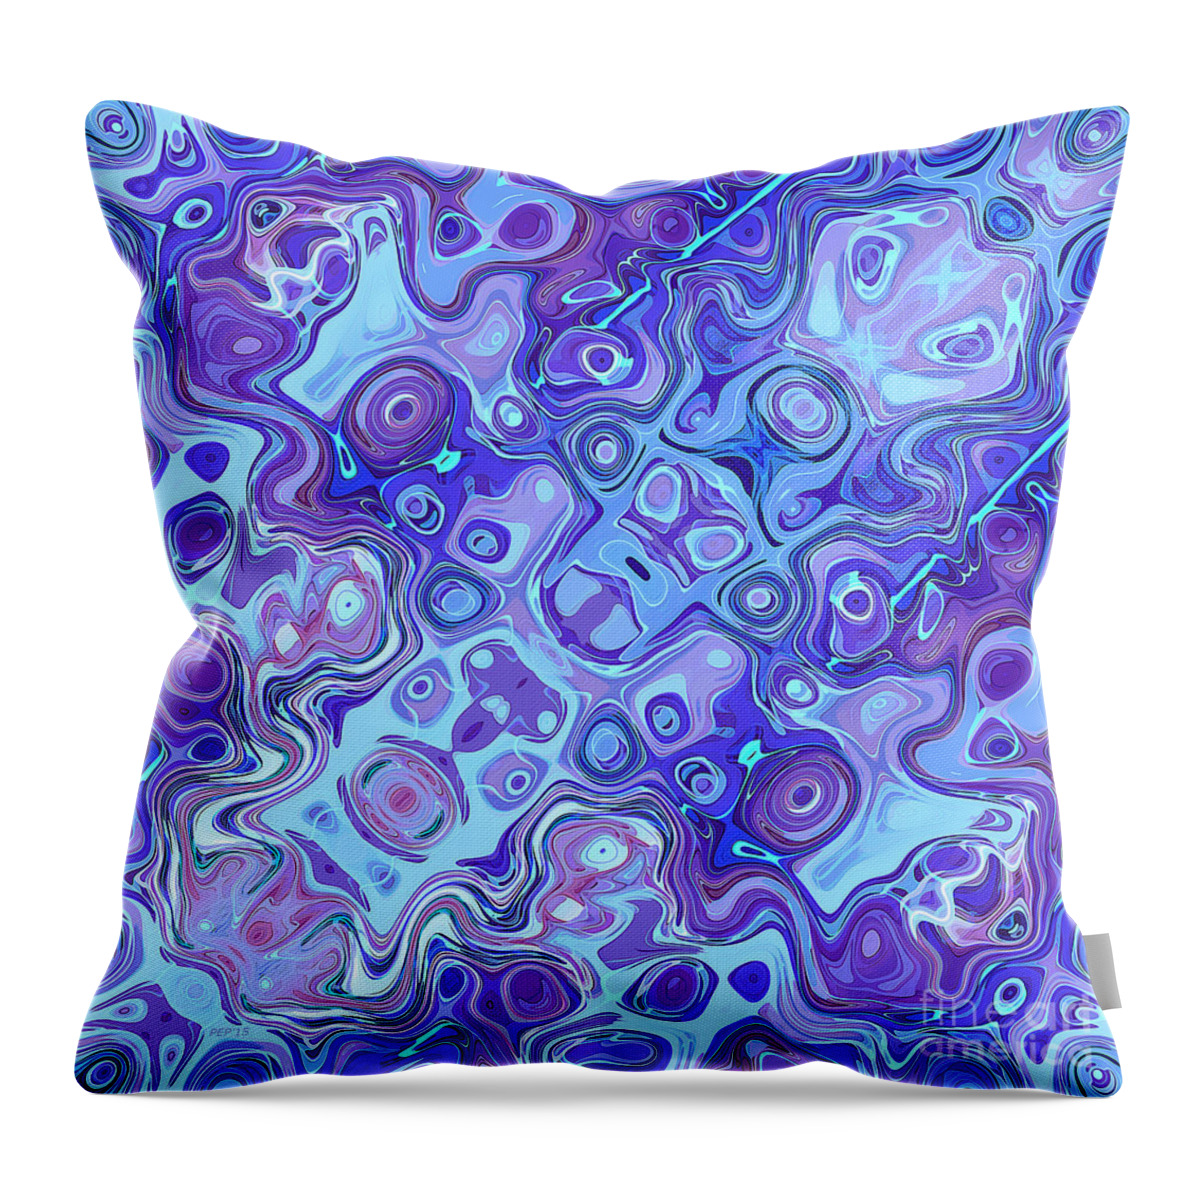 Pattern Throw Pillow featuring the digital art Blue Spectrum Abstract by Phil Perkins